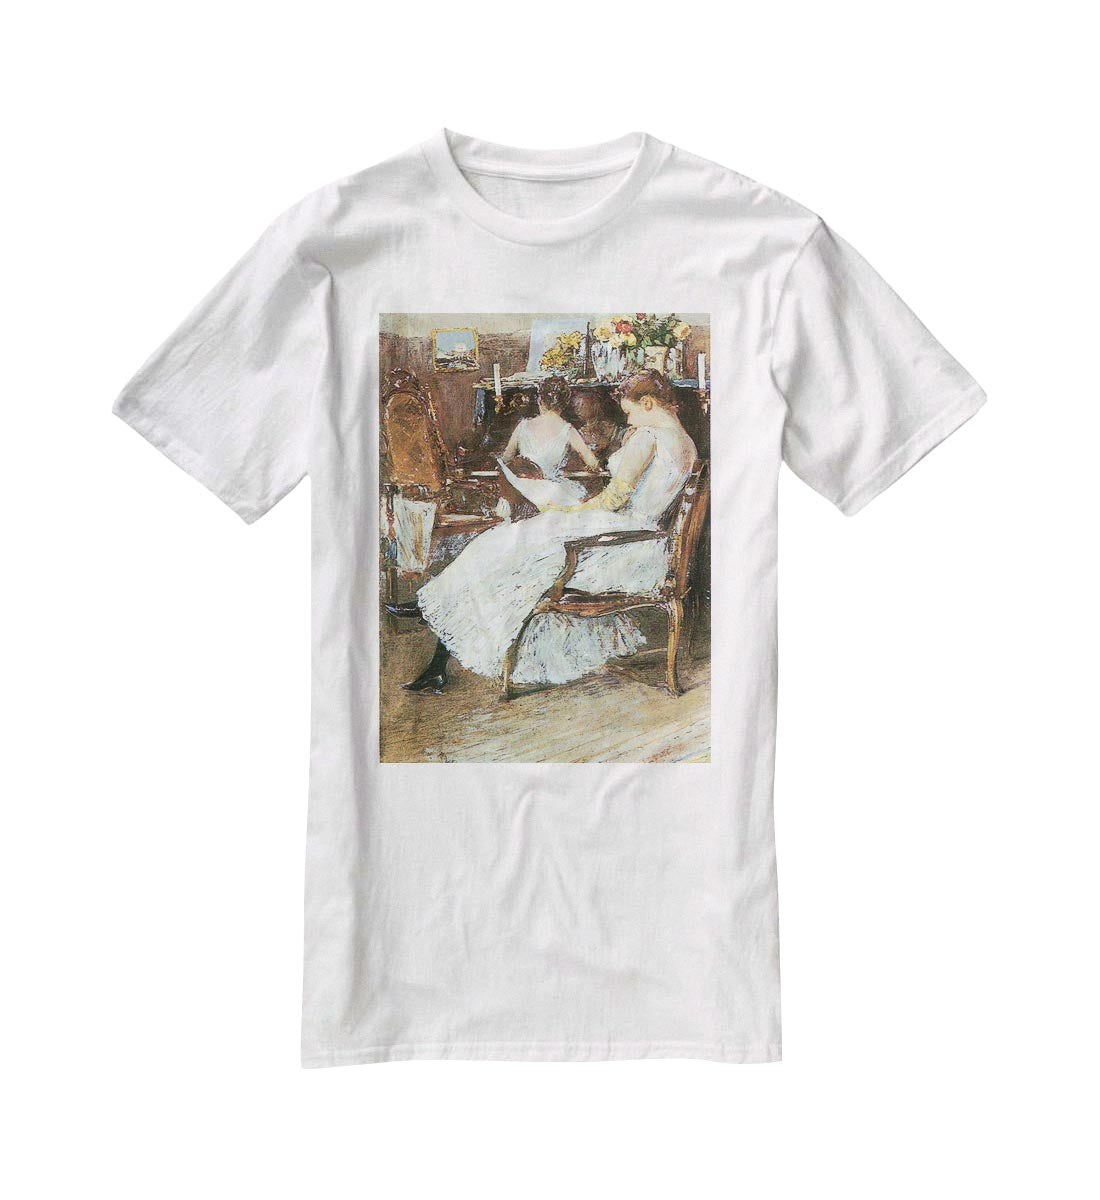 Mrs. Hassam and her sister by Hassam T-Shirt - Canvas Art Rocks - 5